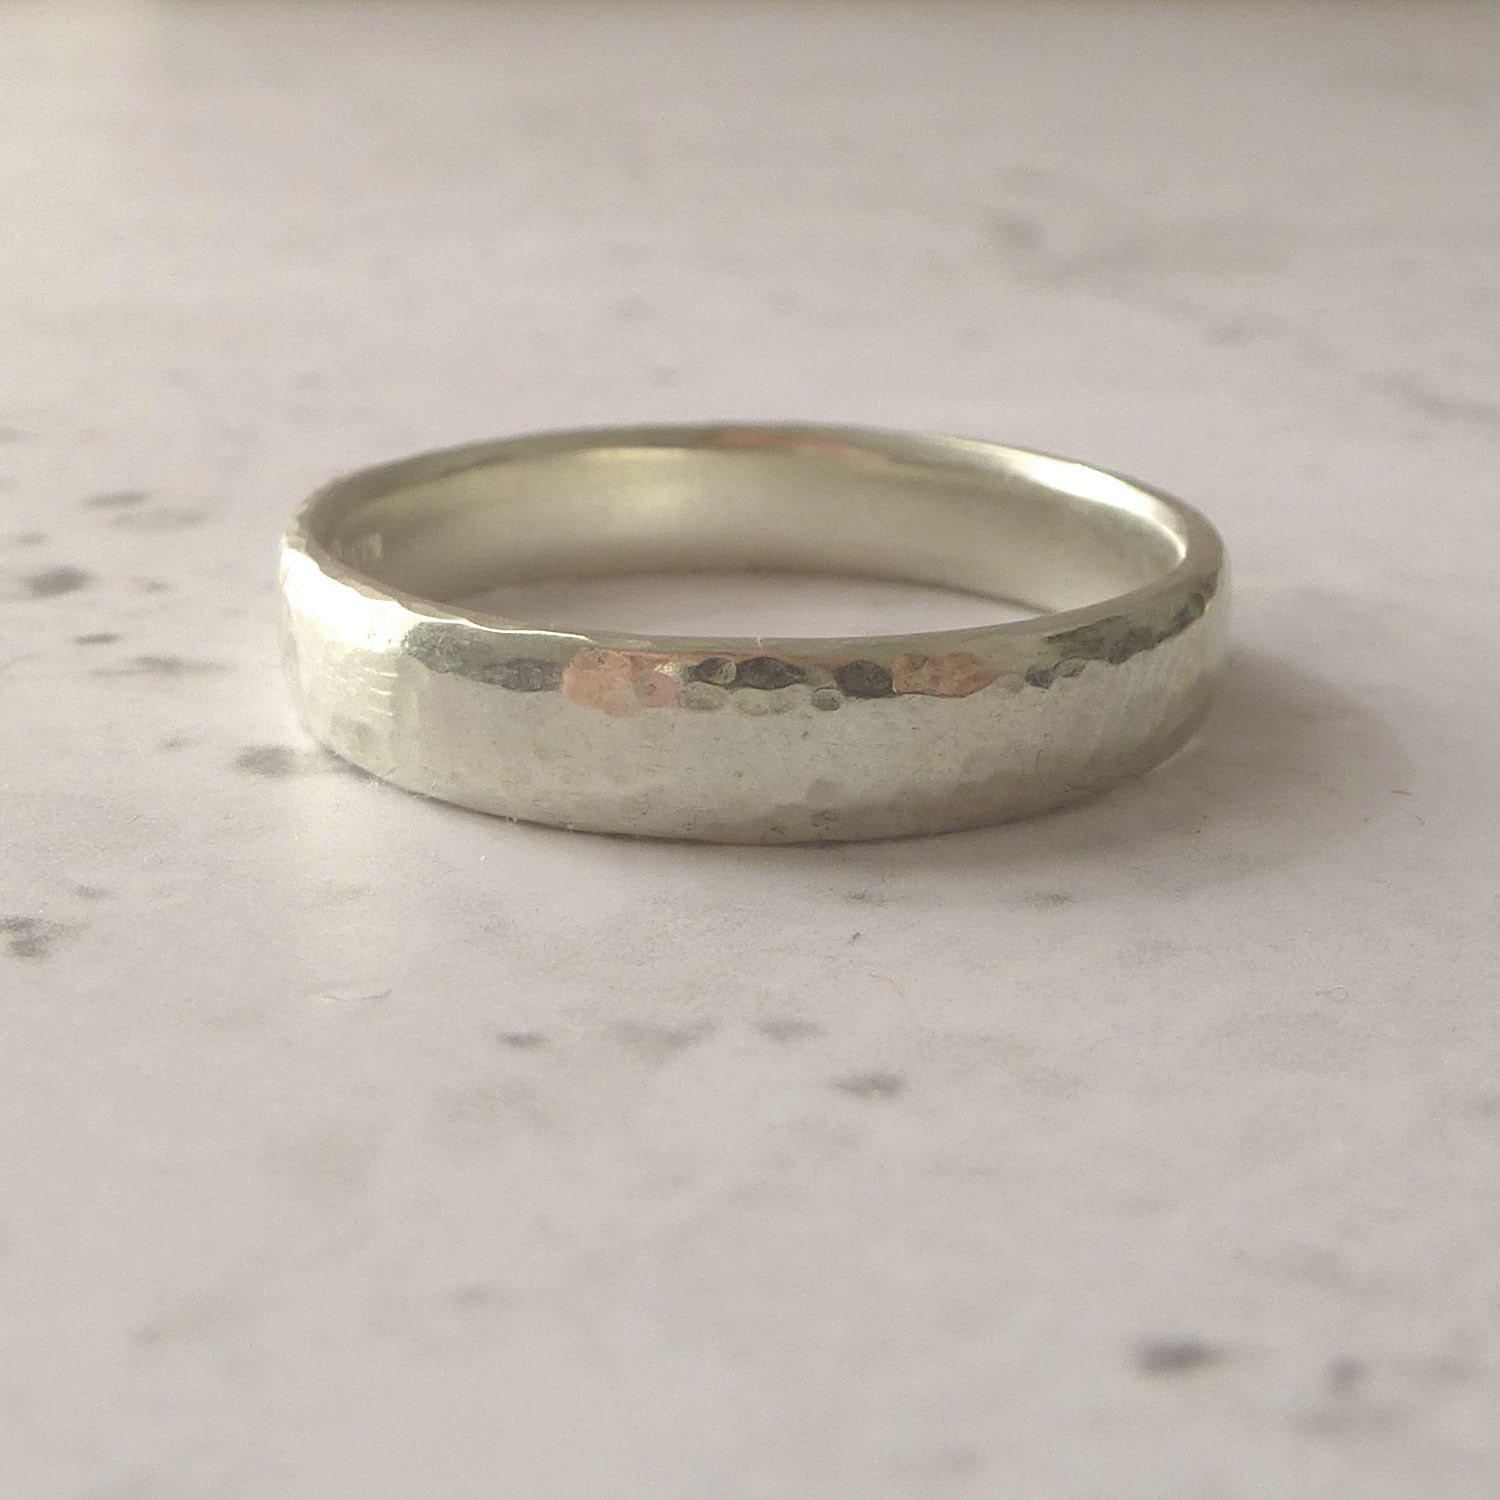 hand made wedding band in 9ct white gold, hammered finish, soft modern court shape